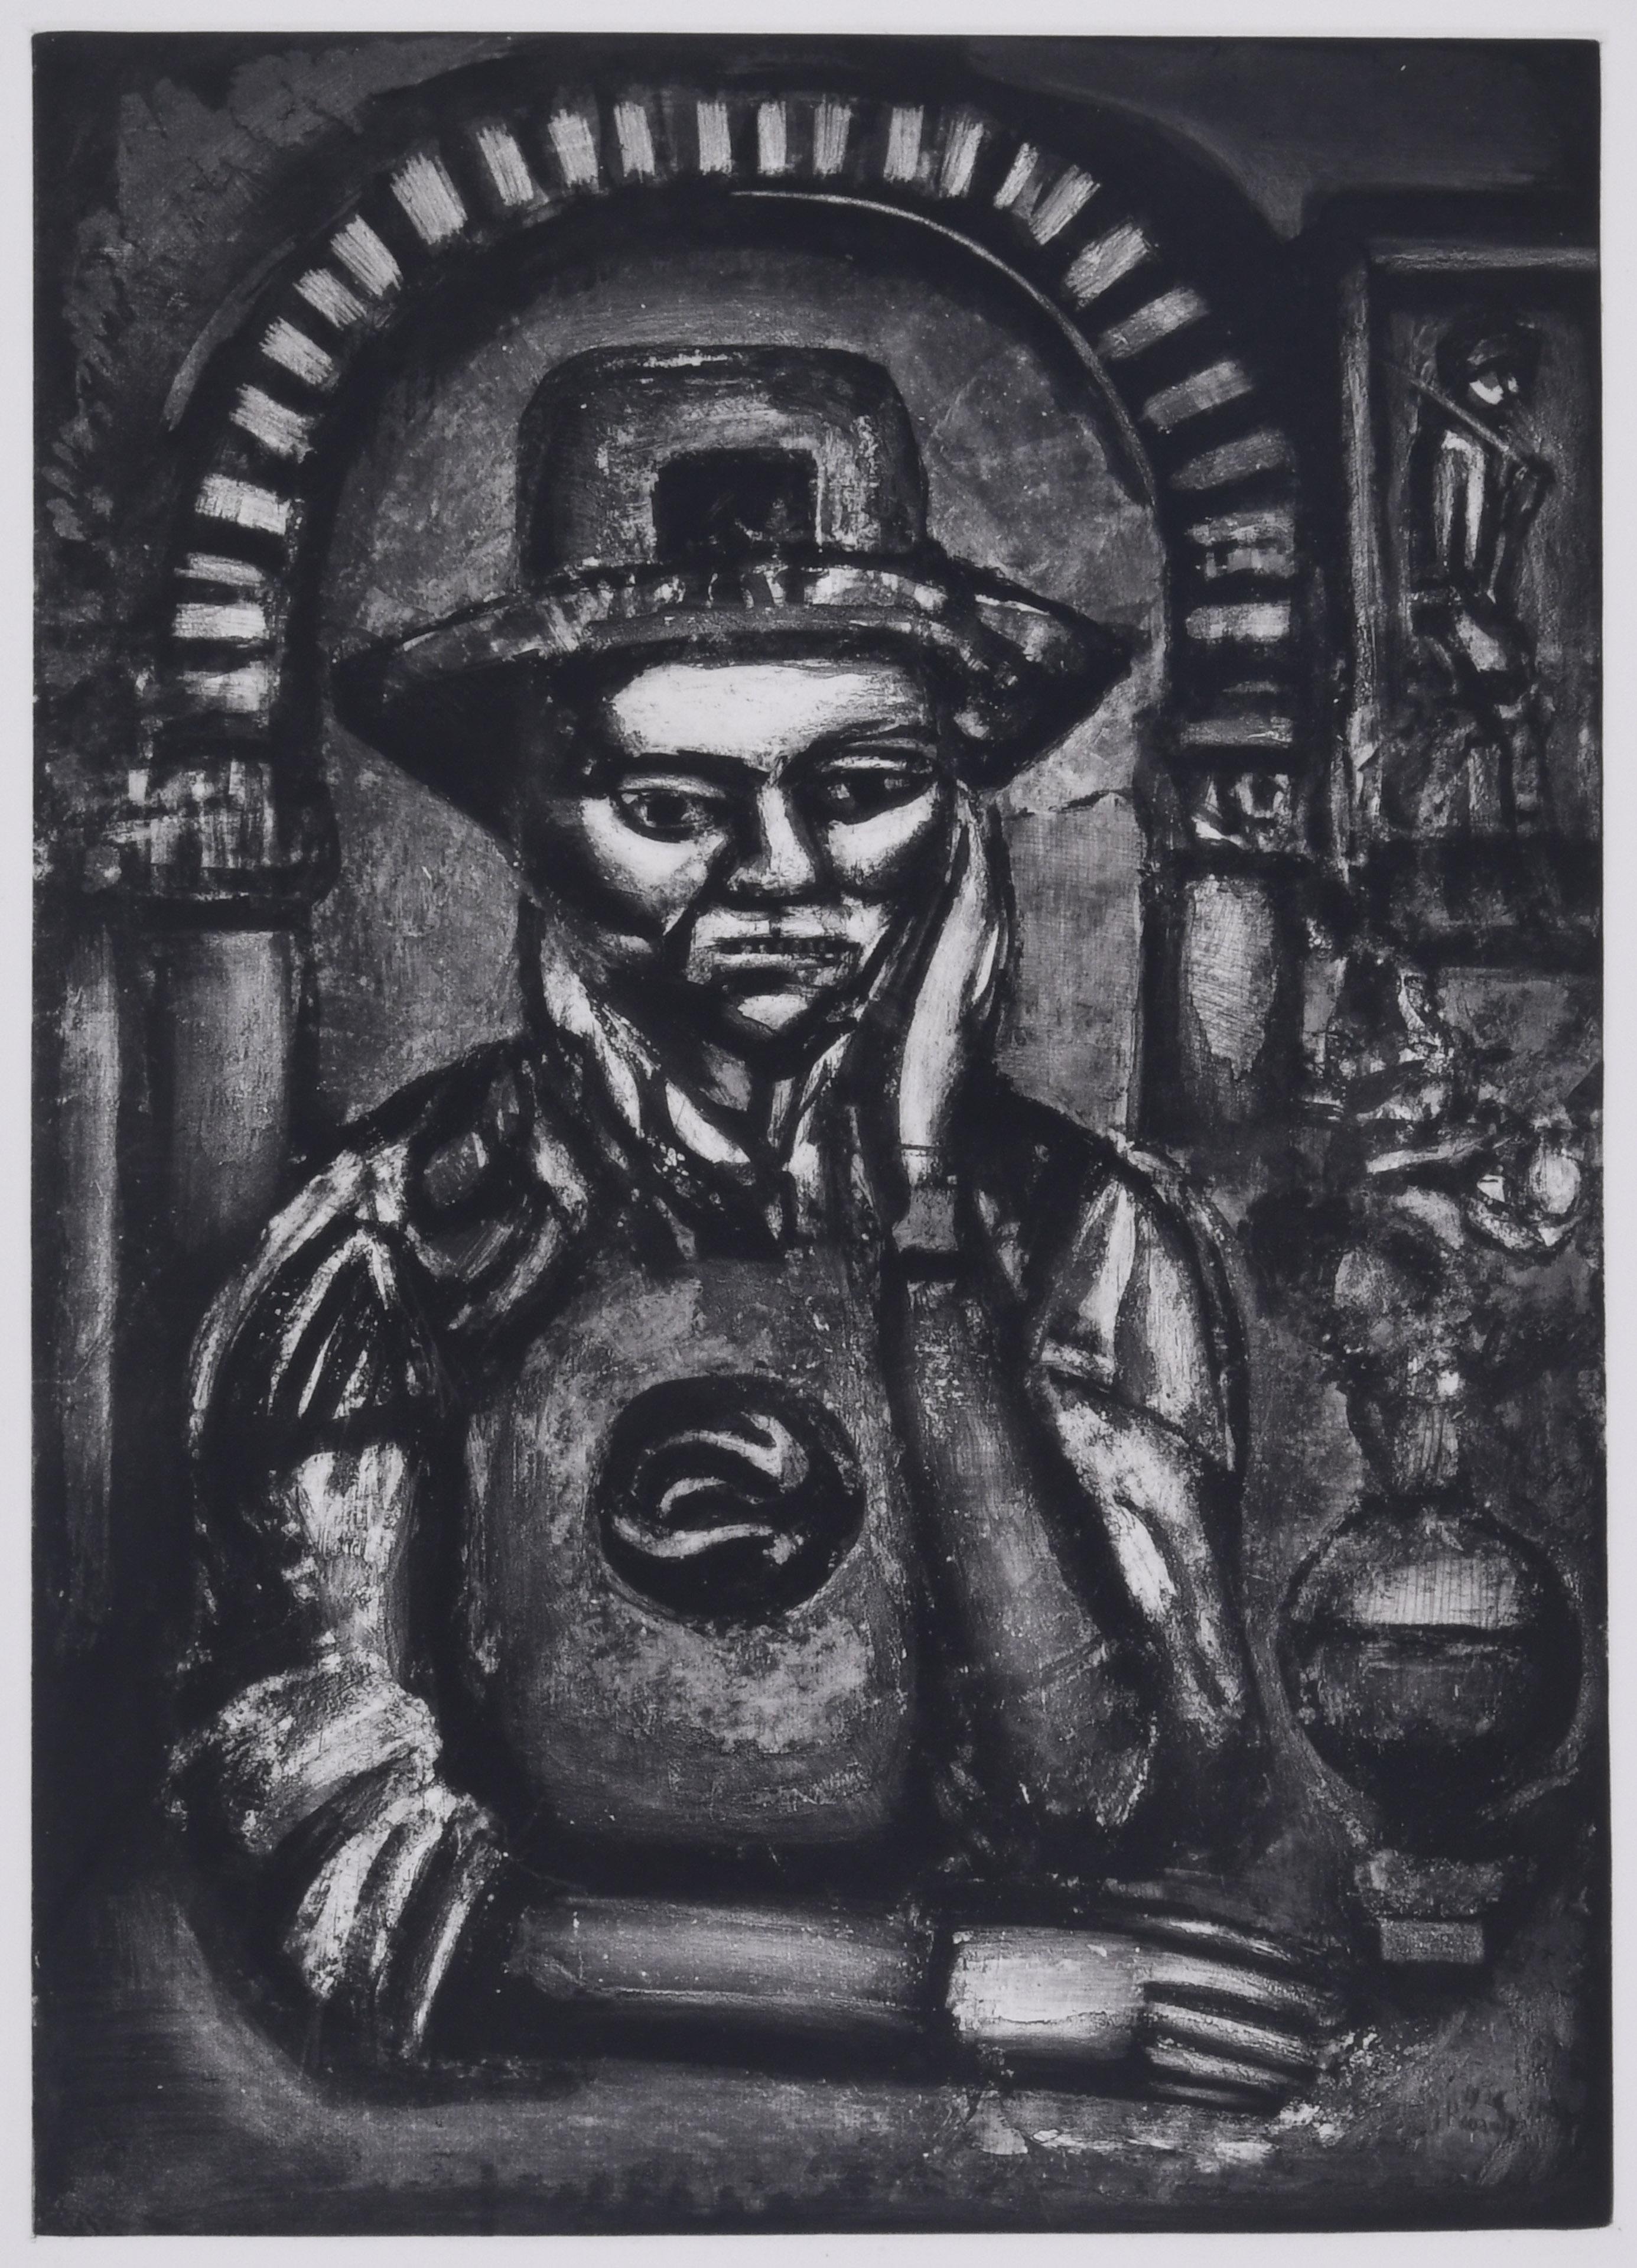 Chinois inventa, dit-on, la poudre a canon, nous en fit don - French School Print by Georges Rouault